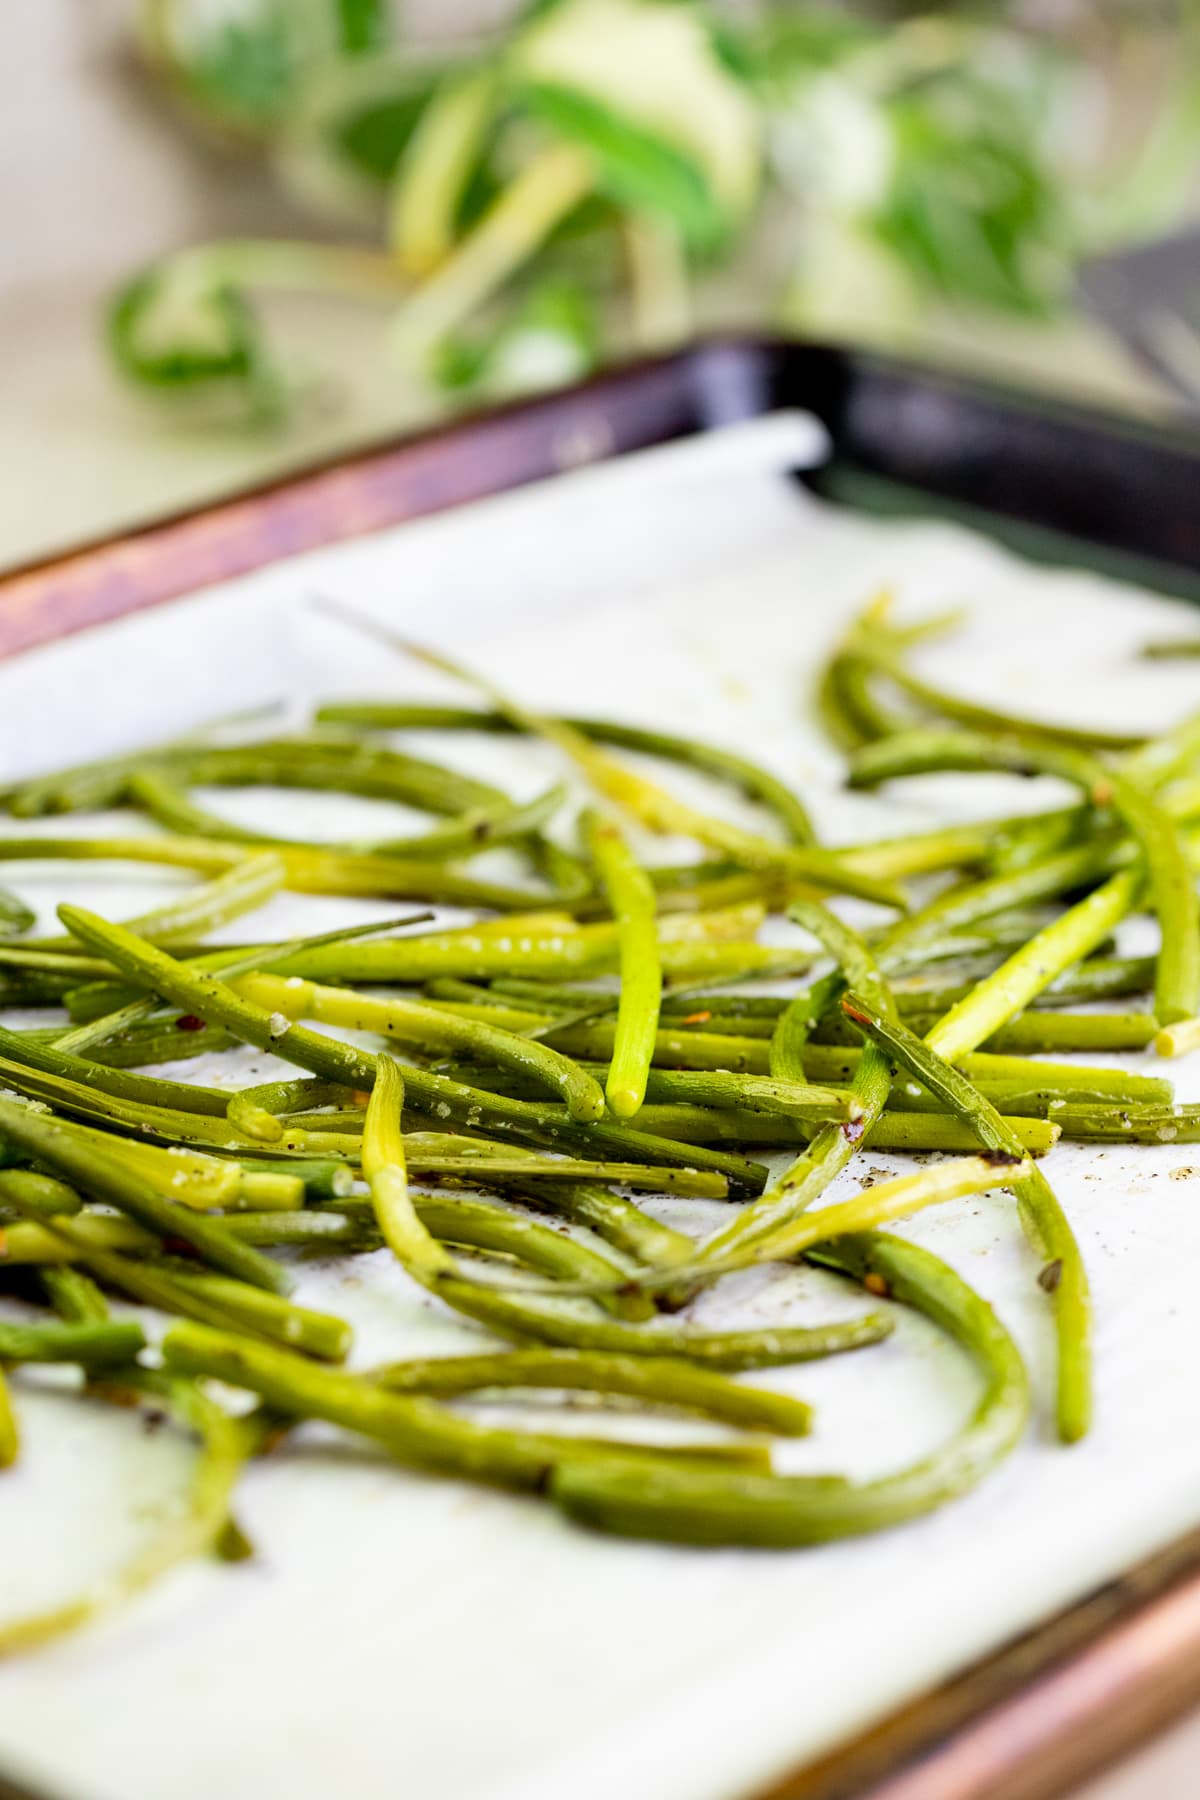 Roasted Garlic Scapes - Lady Lee's Home